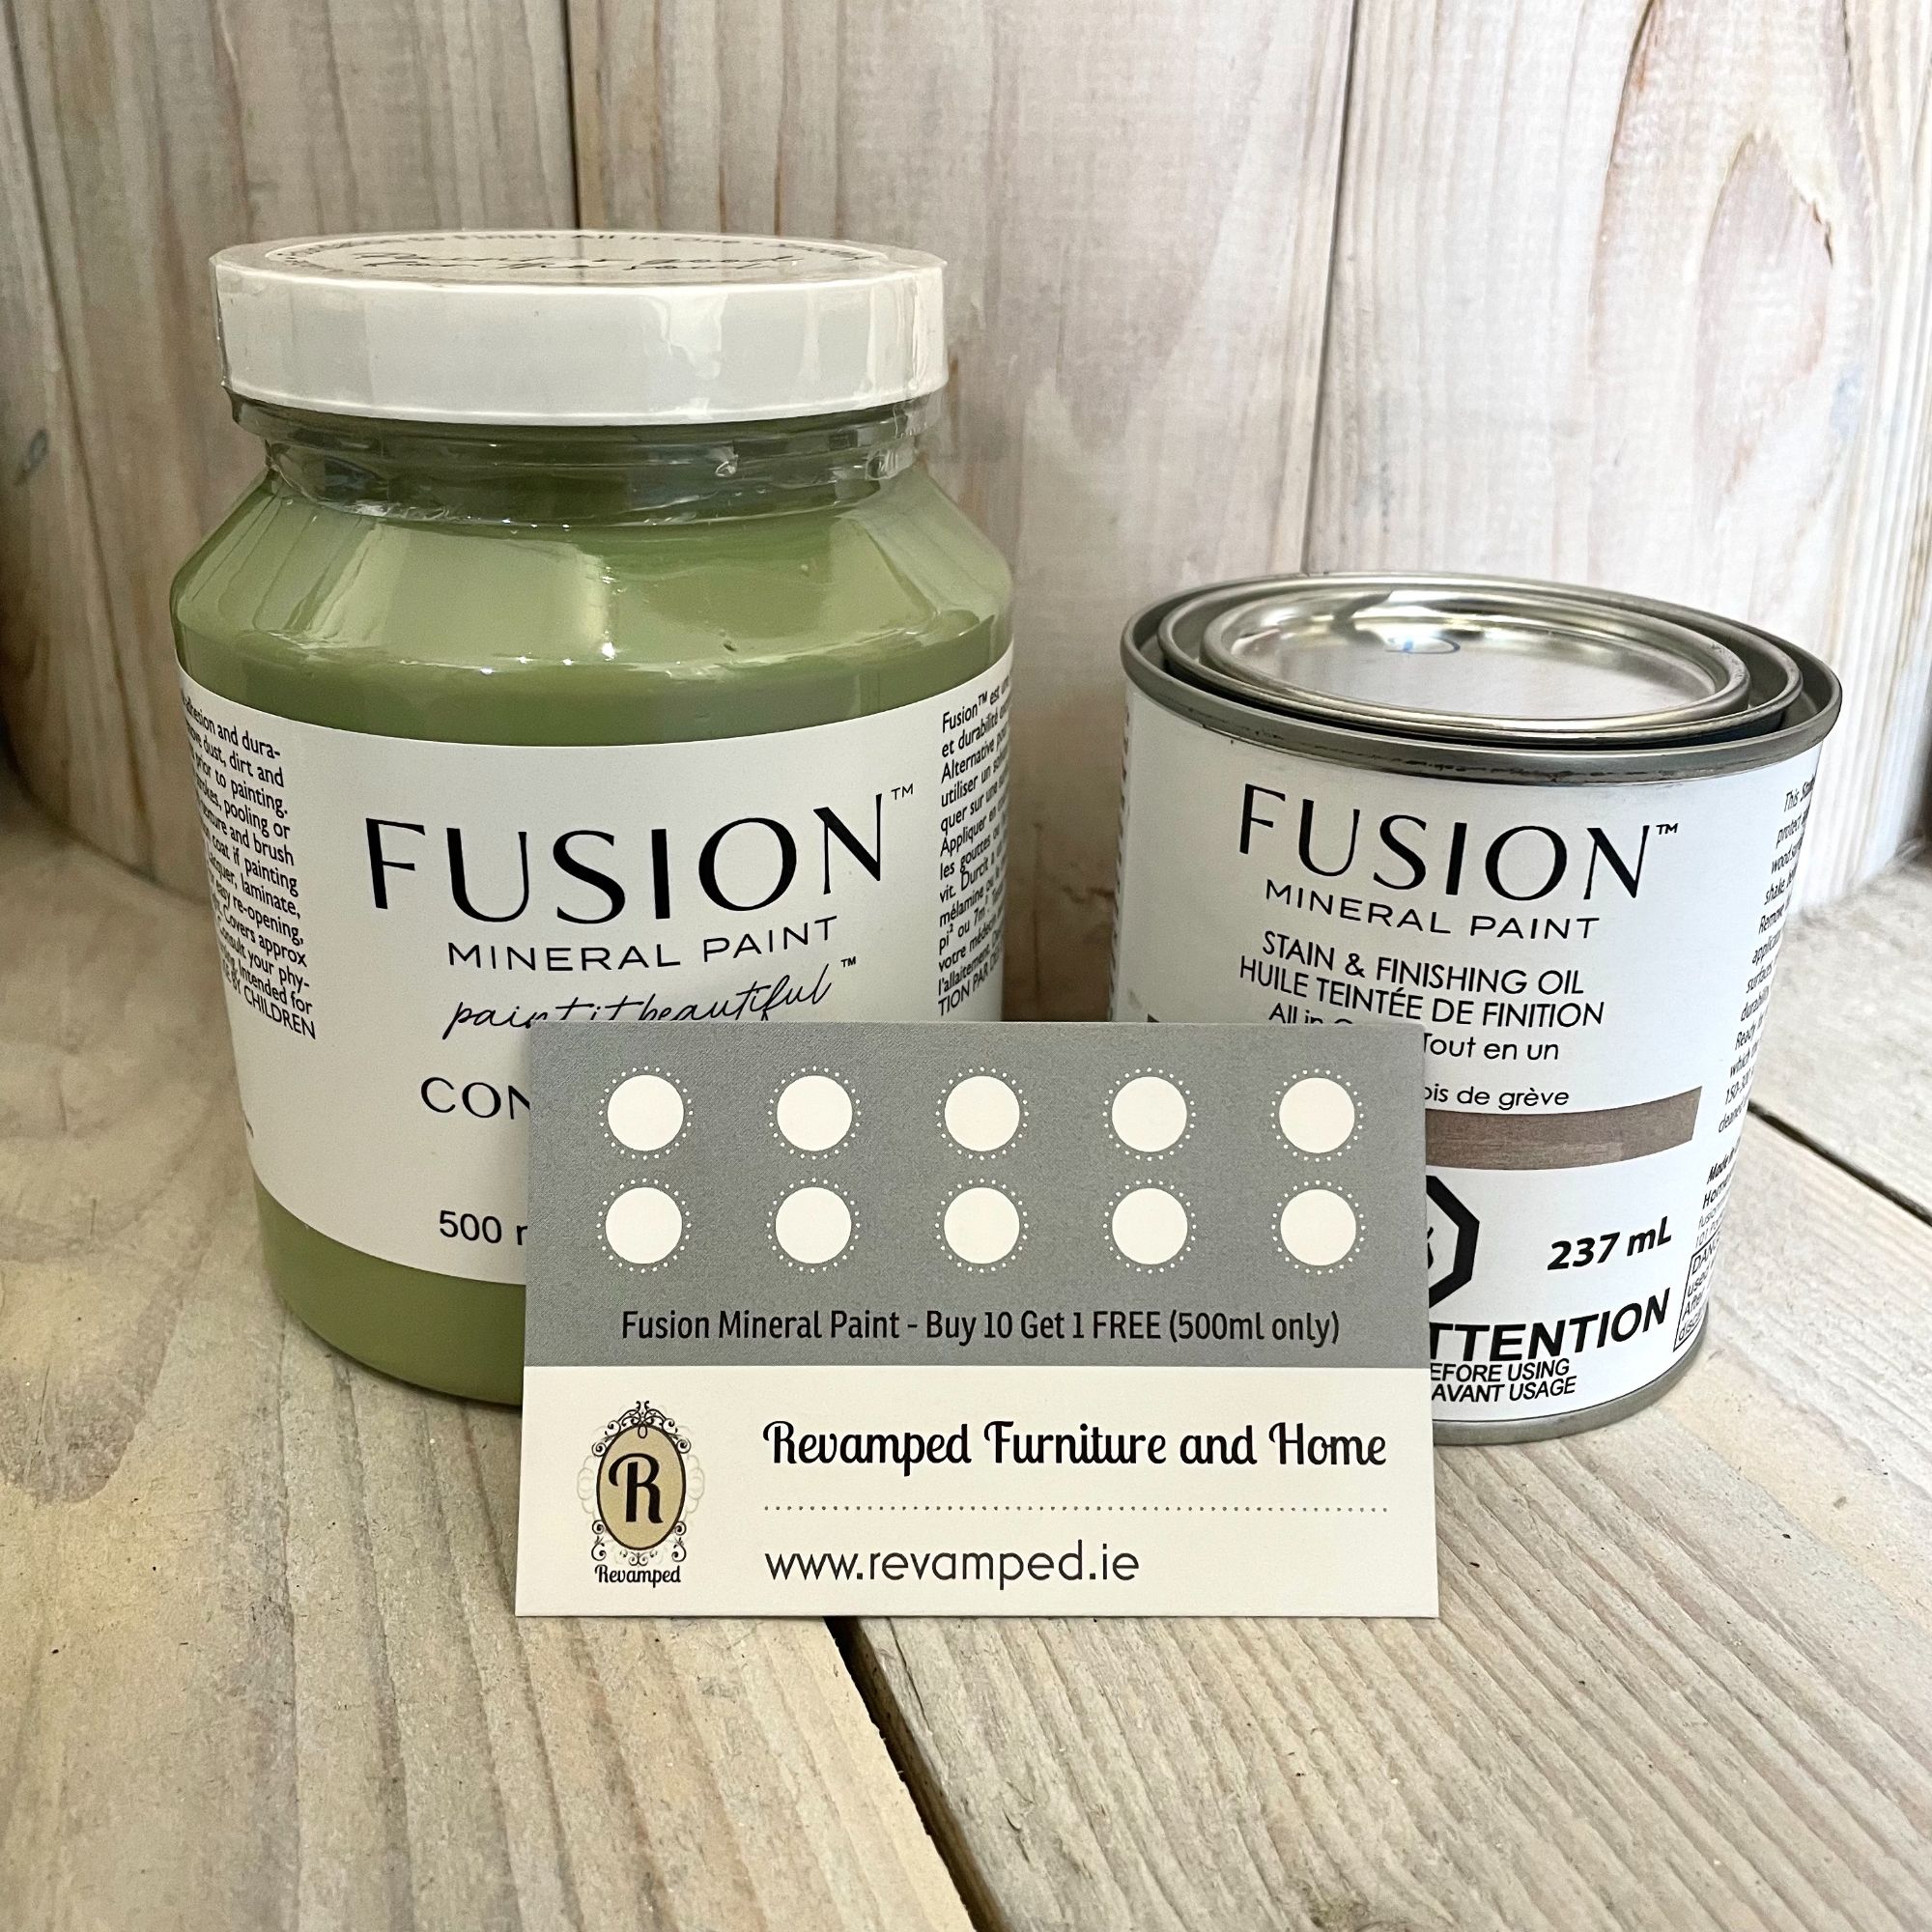 Fusion Mineral Paint Loyalty Scheme at Revamped Furniture and Home